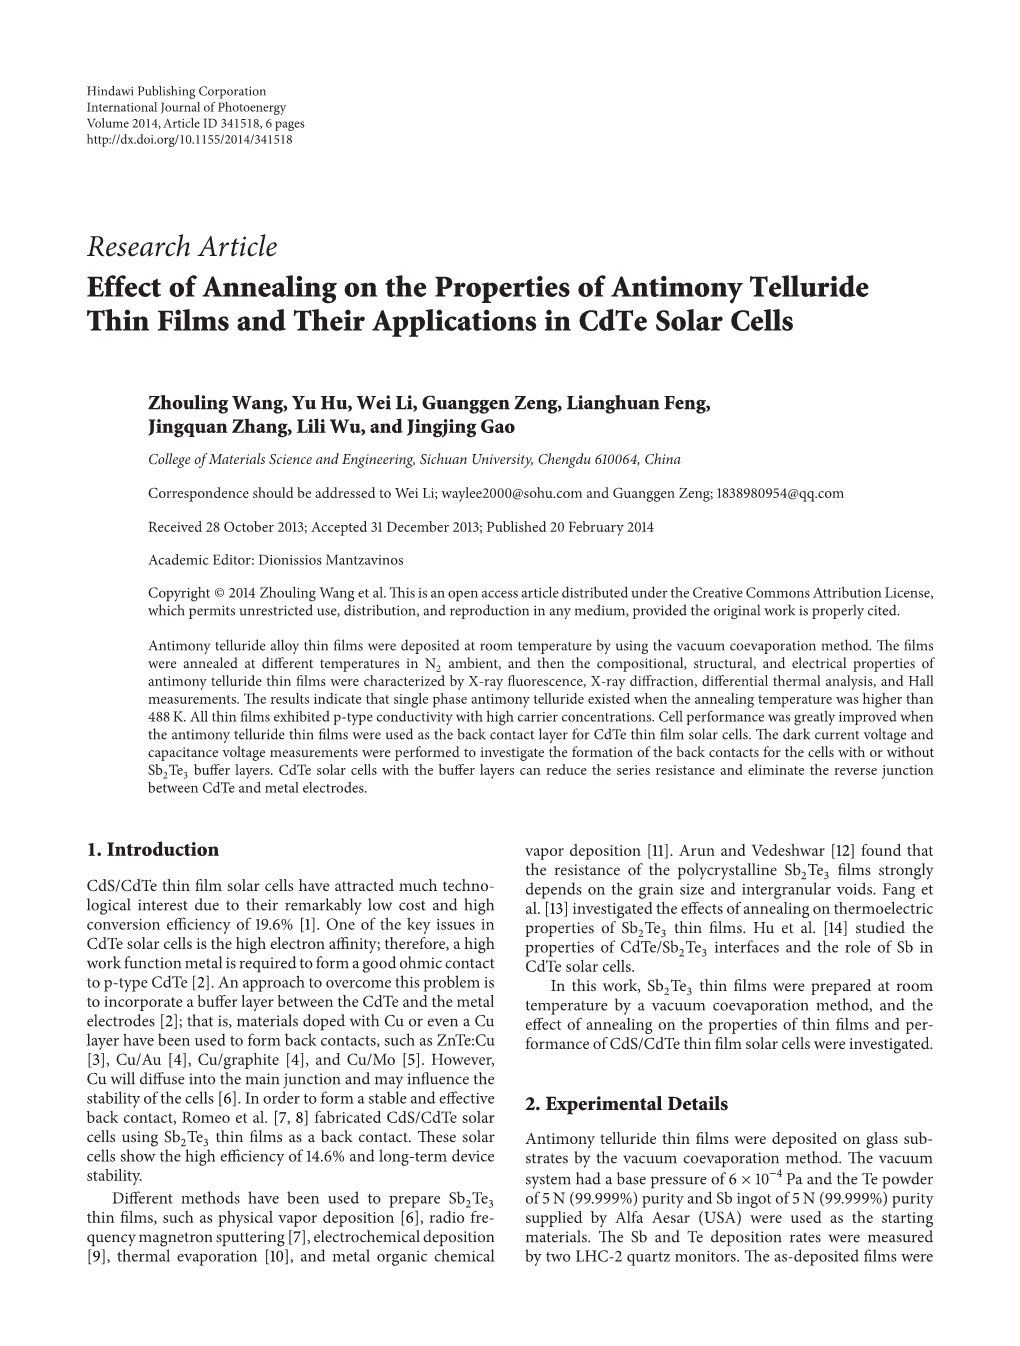 Effect of Annealing on the Properties of Antimony Telluride Thin Films and Their Applications in Cdte Solar Cells